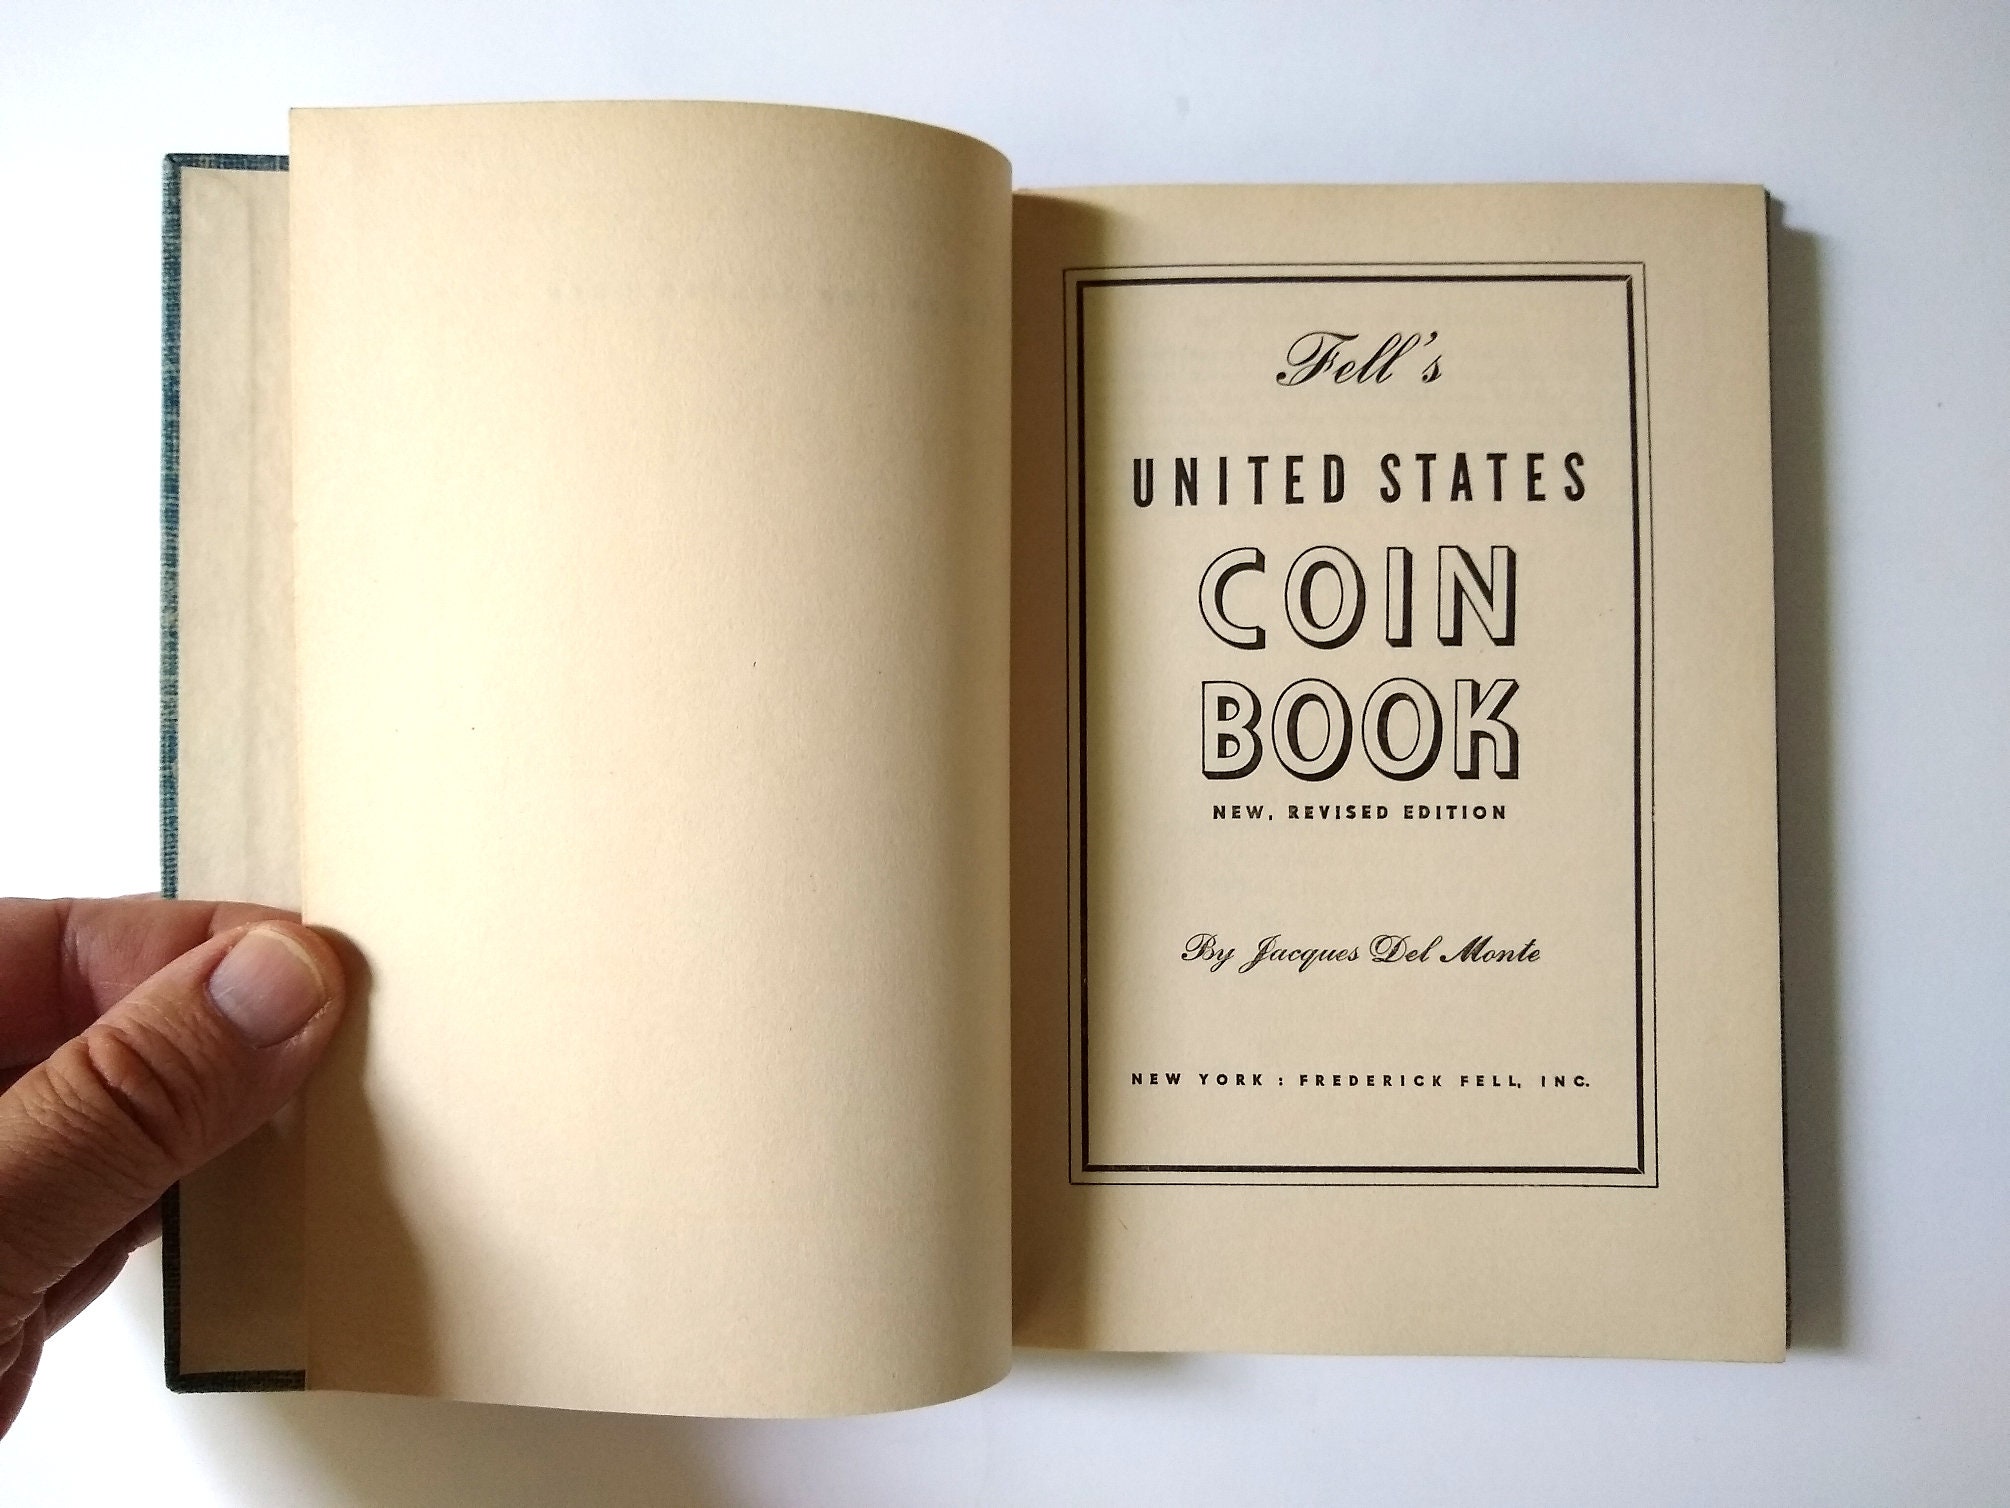 FELL'S UNITED STATES COIN BOOK, Jacques Del Monte